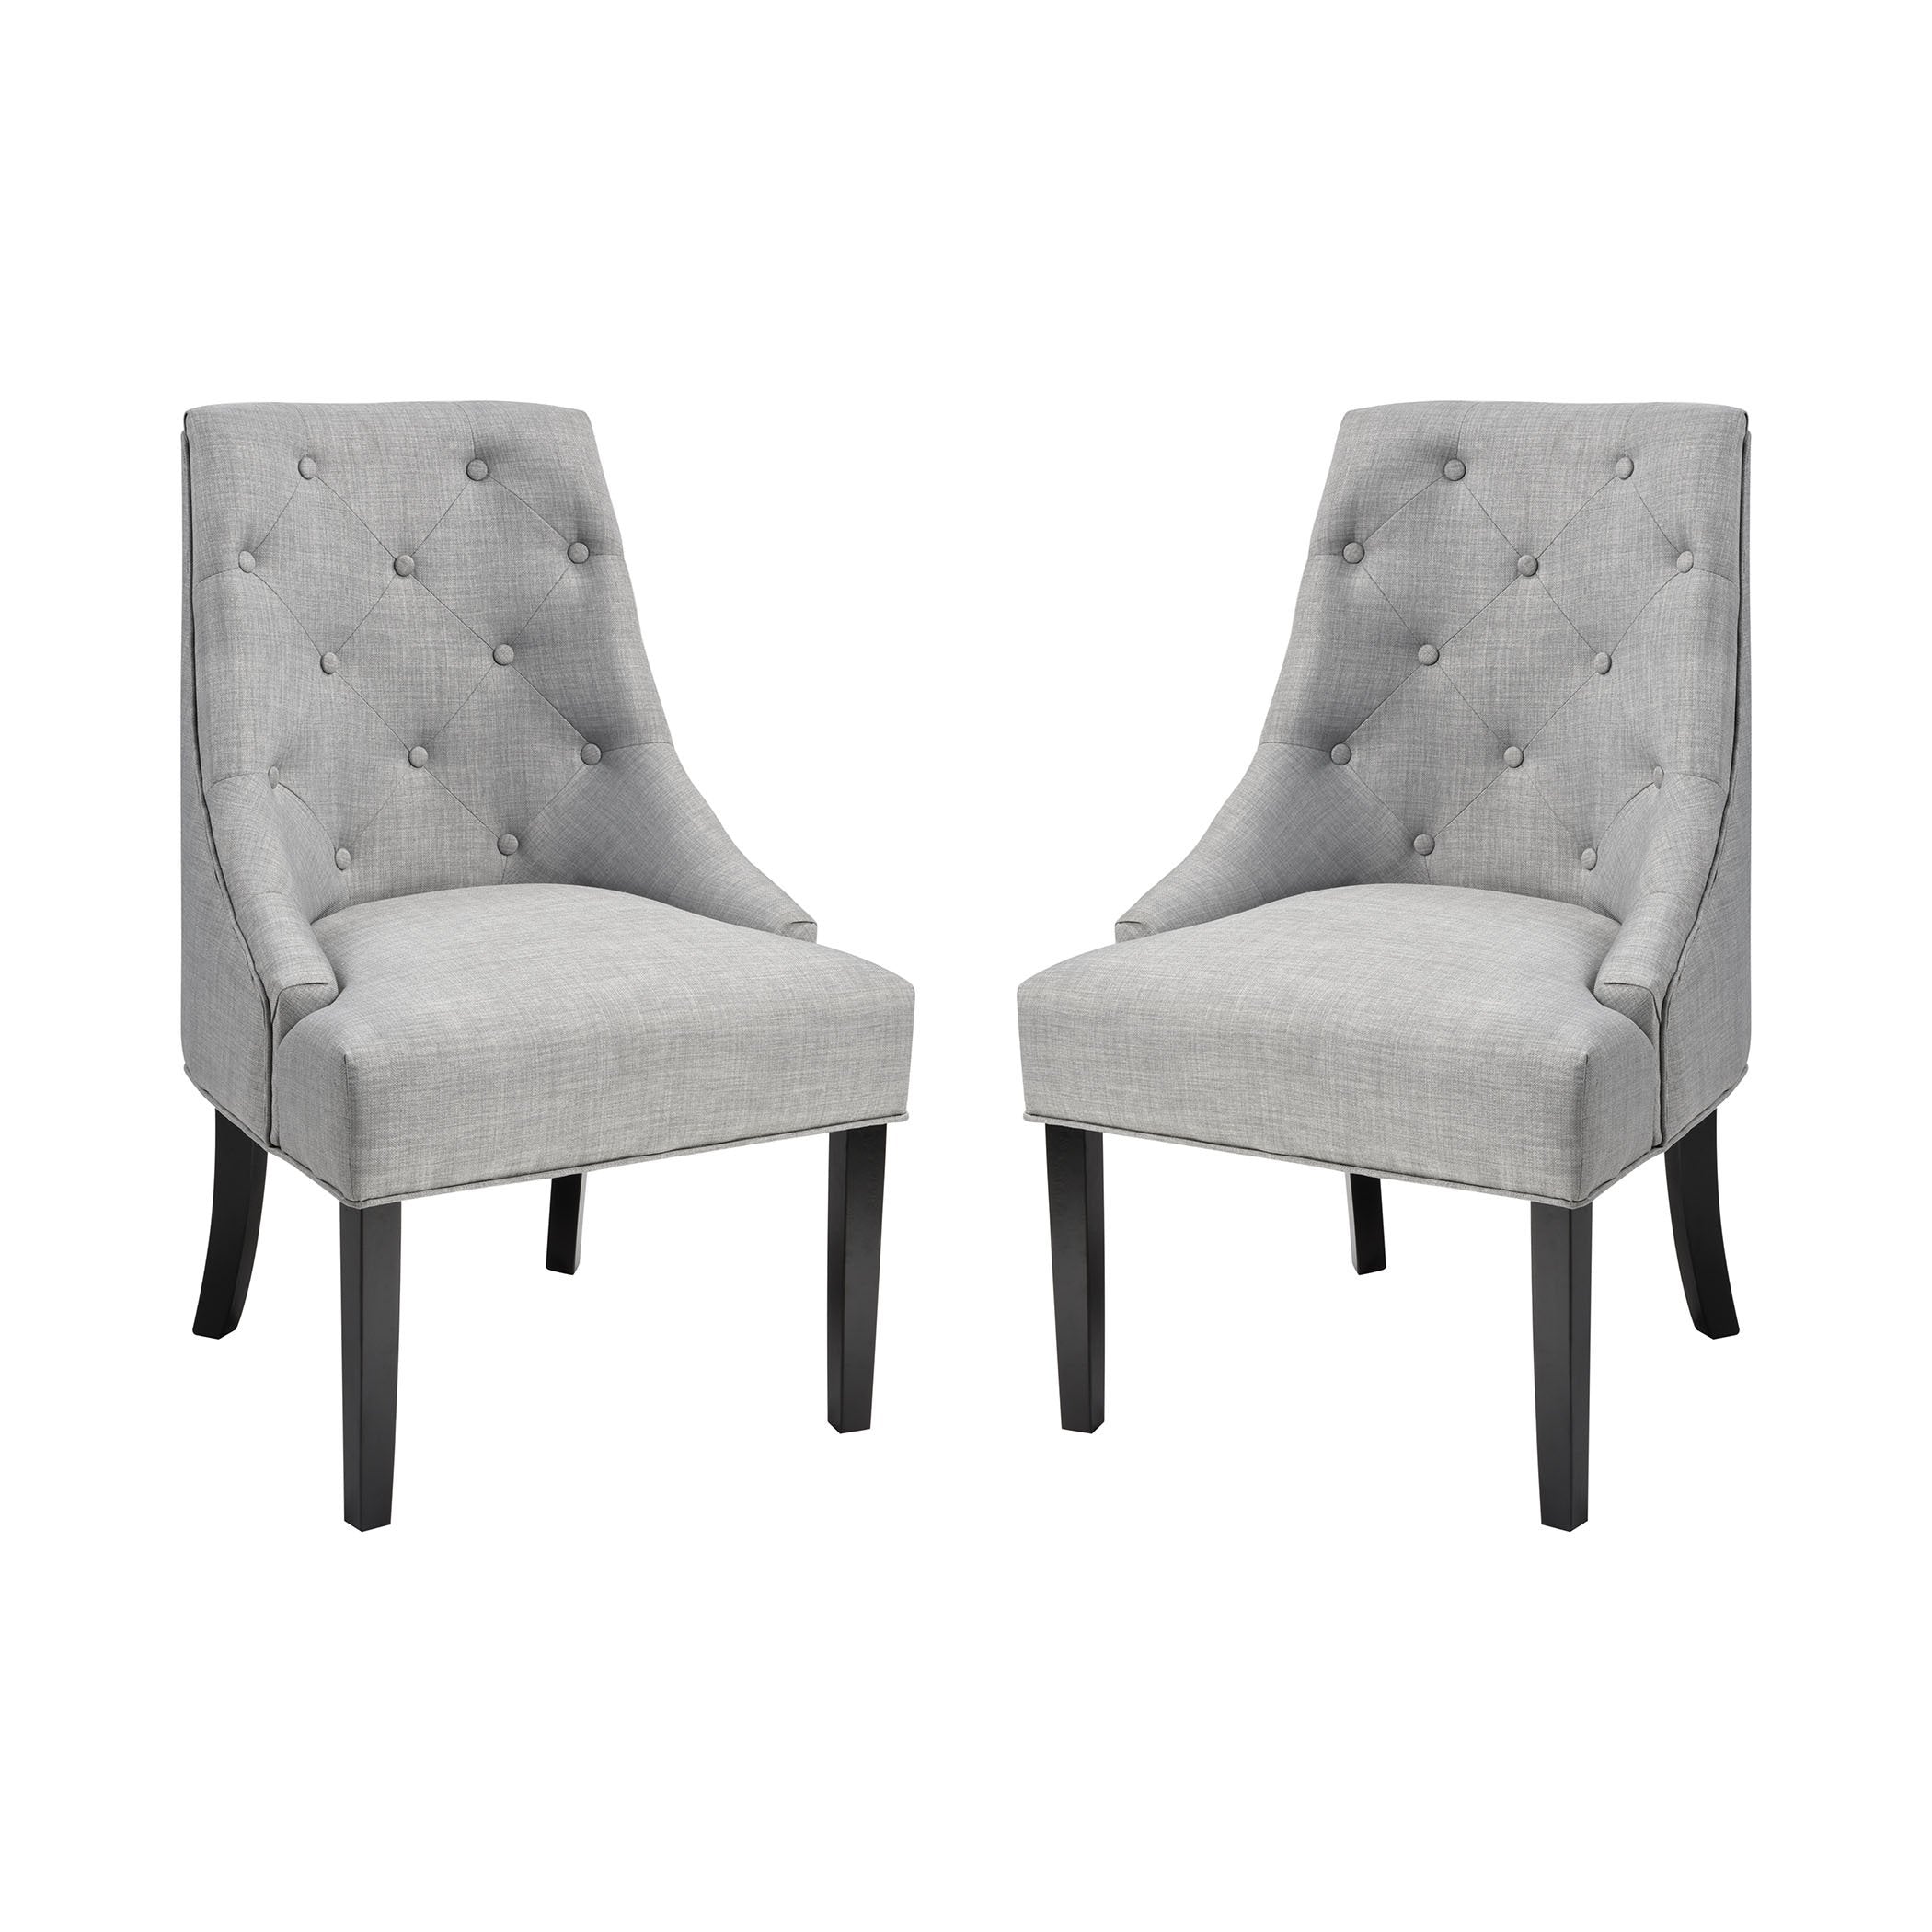 Nine Elms Accent Chair - Light Grey Furniture Sterling 